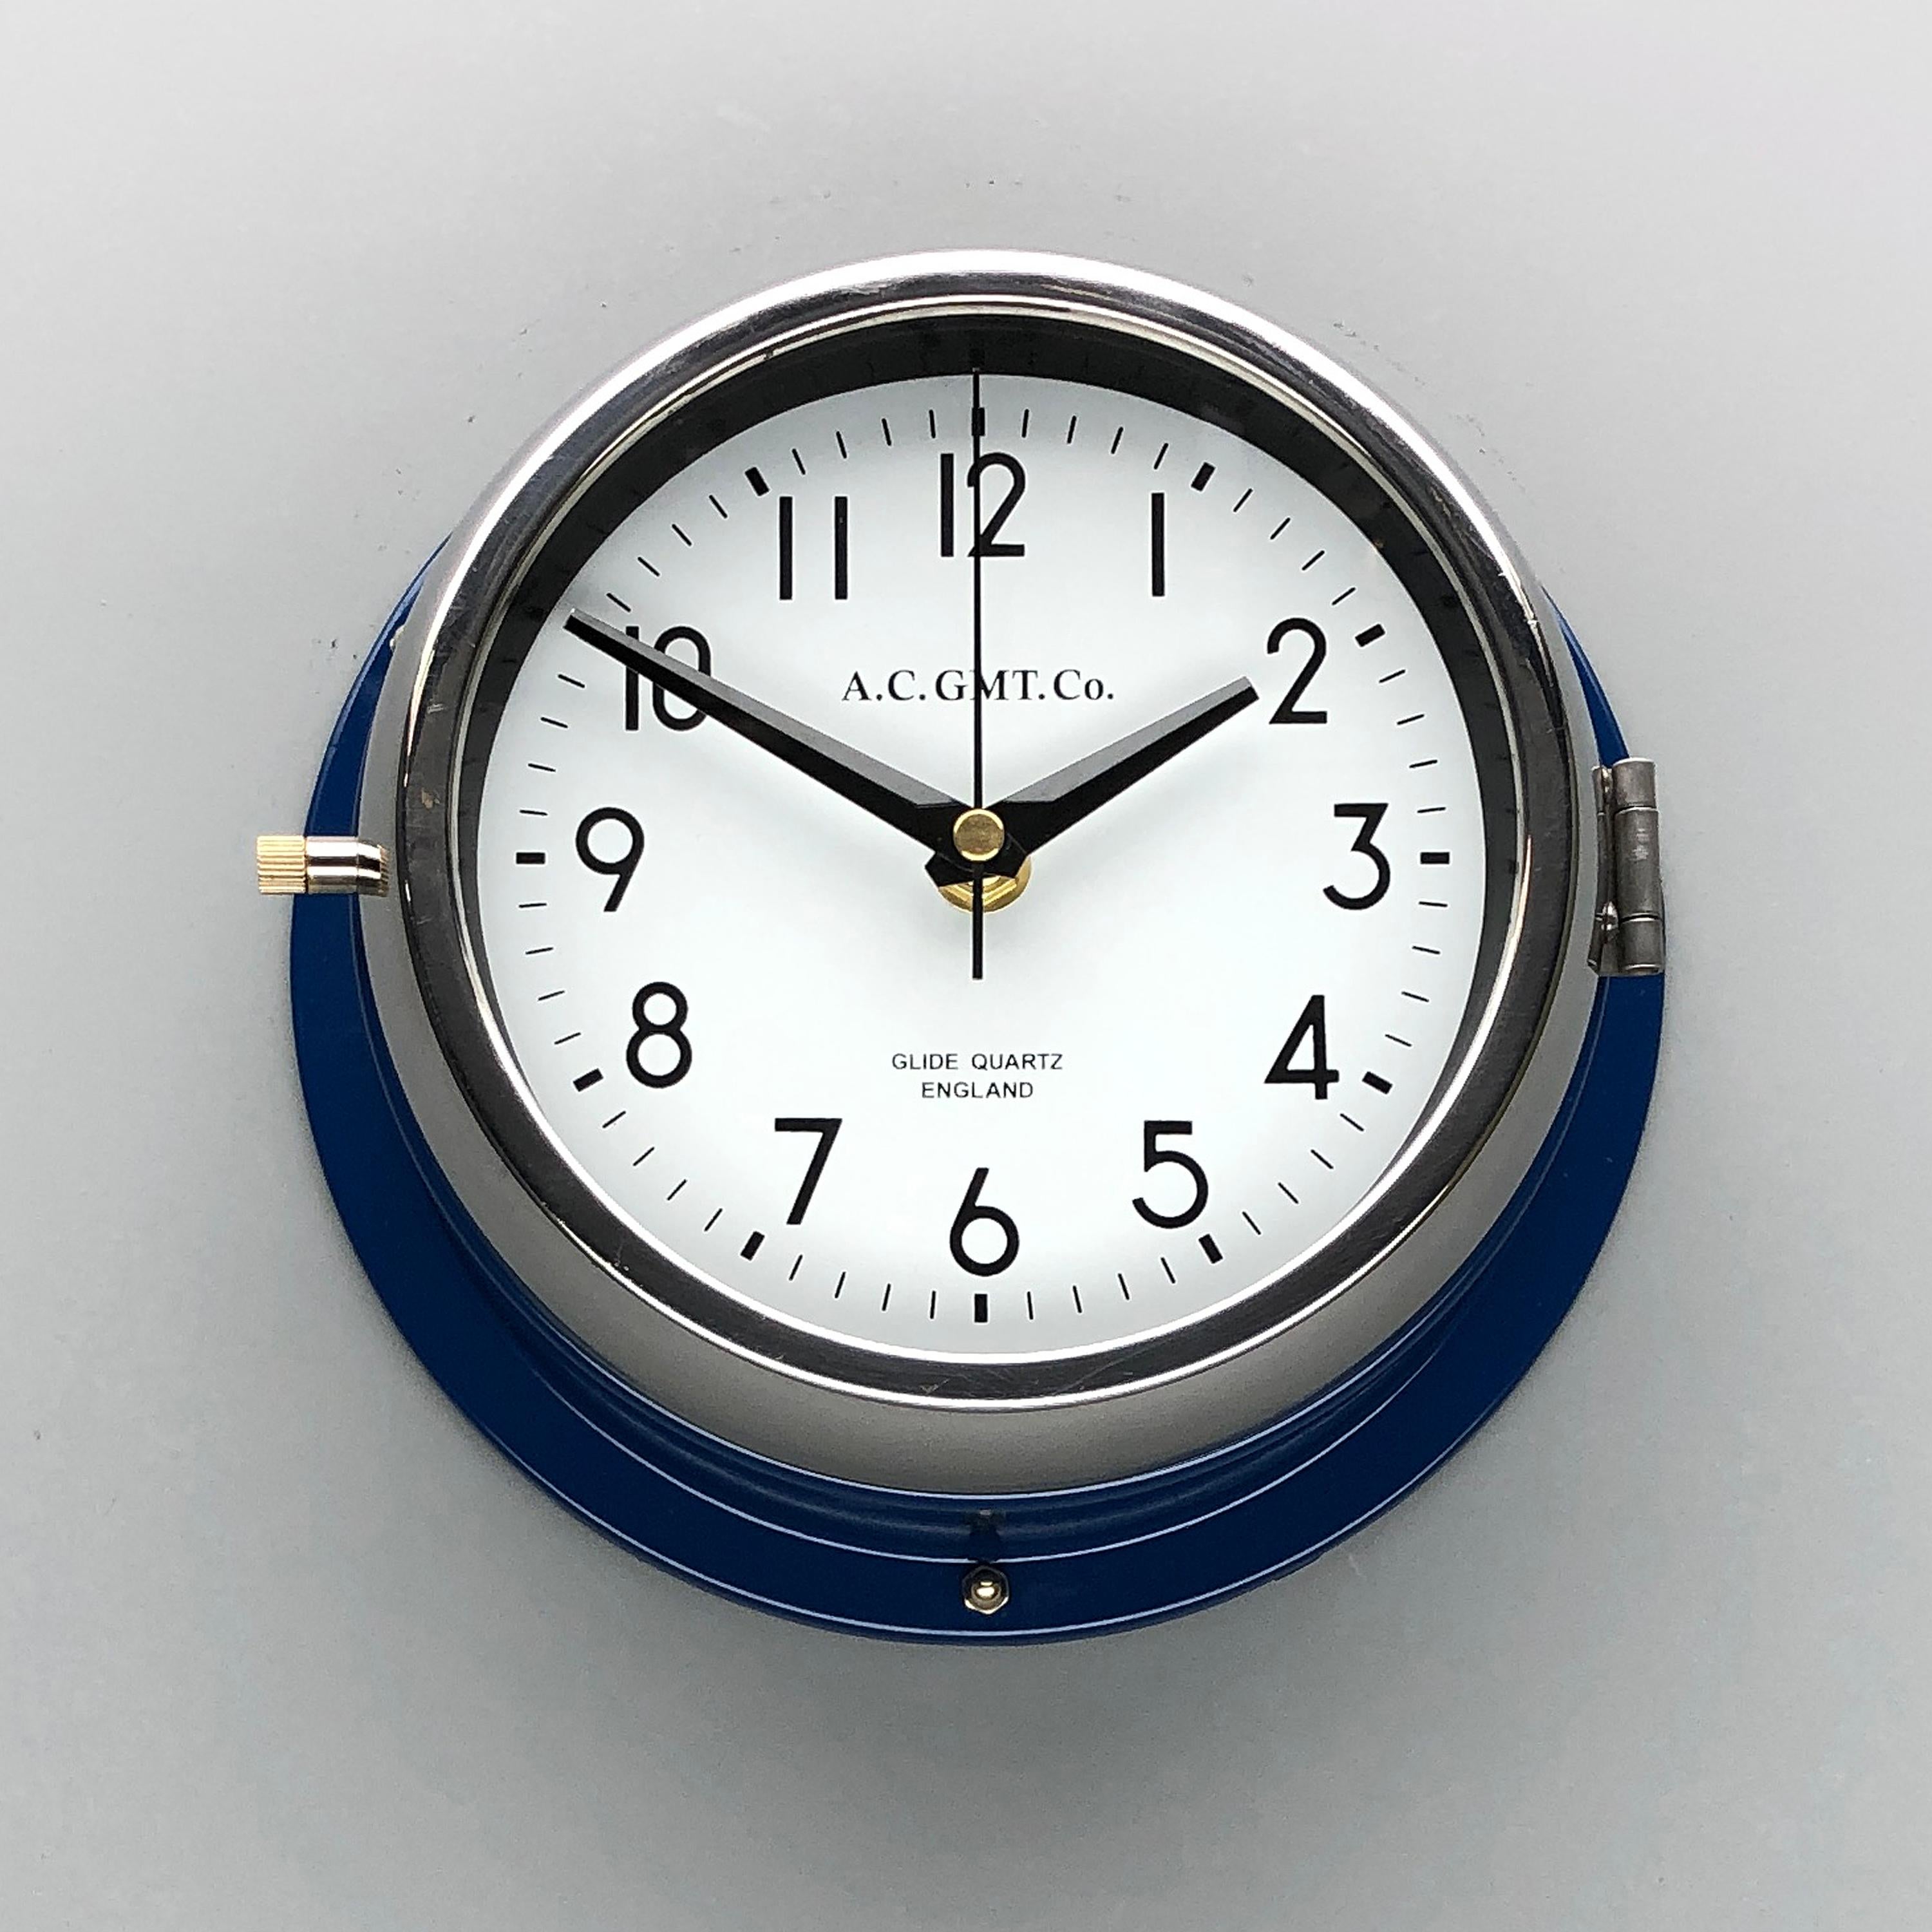 1970s British Classic Blue & Chrome Ac Gmt Co. Industrial Wall Clock White Dial For Sale 1